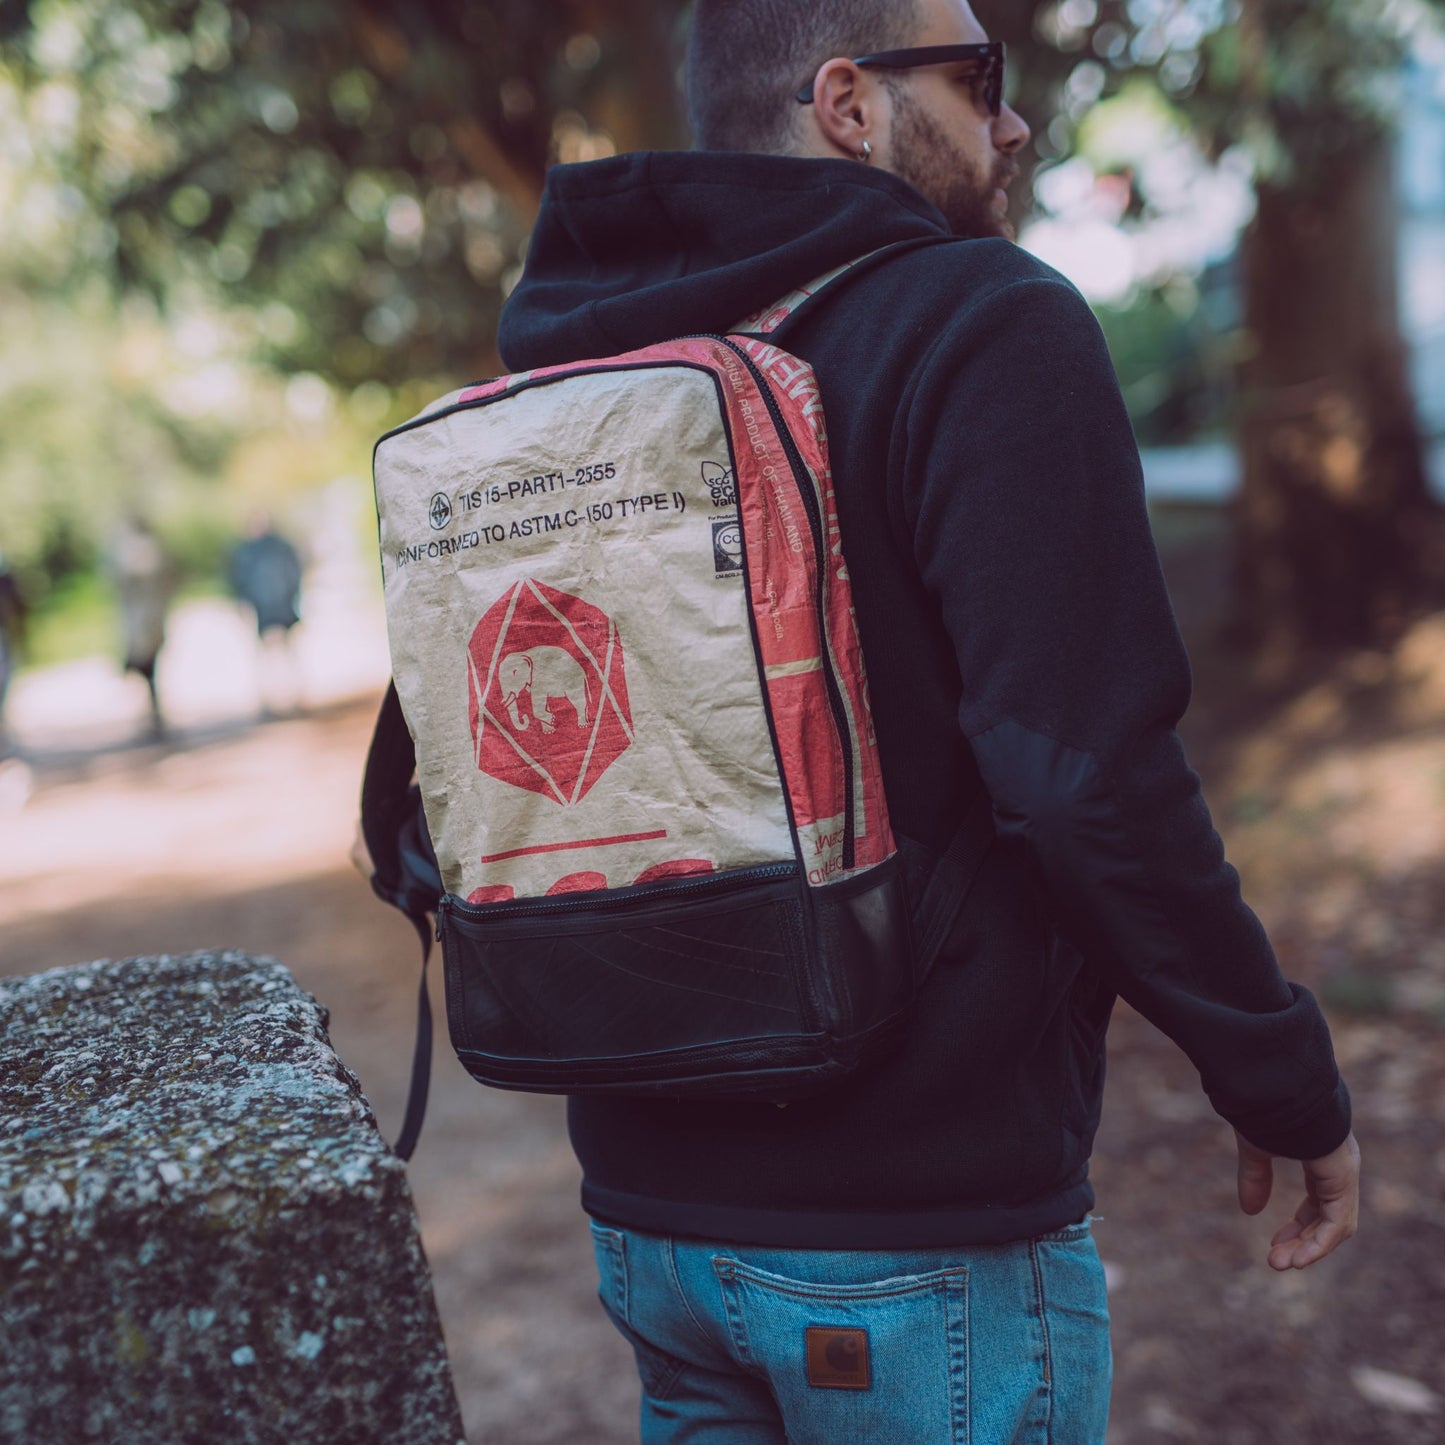 Brixton Backpack made from Recycled Materials - man wears recycled backpack